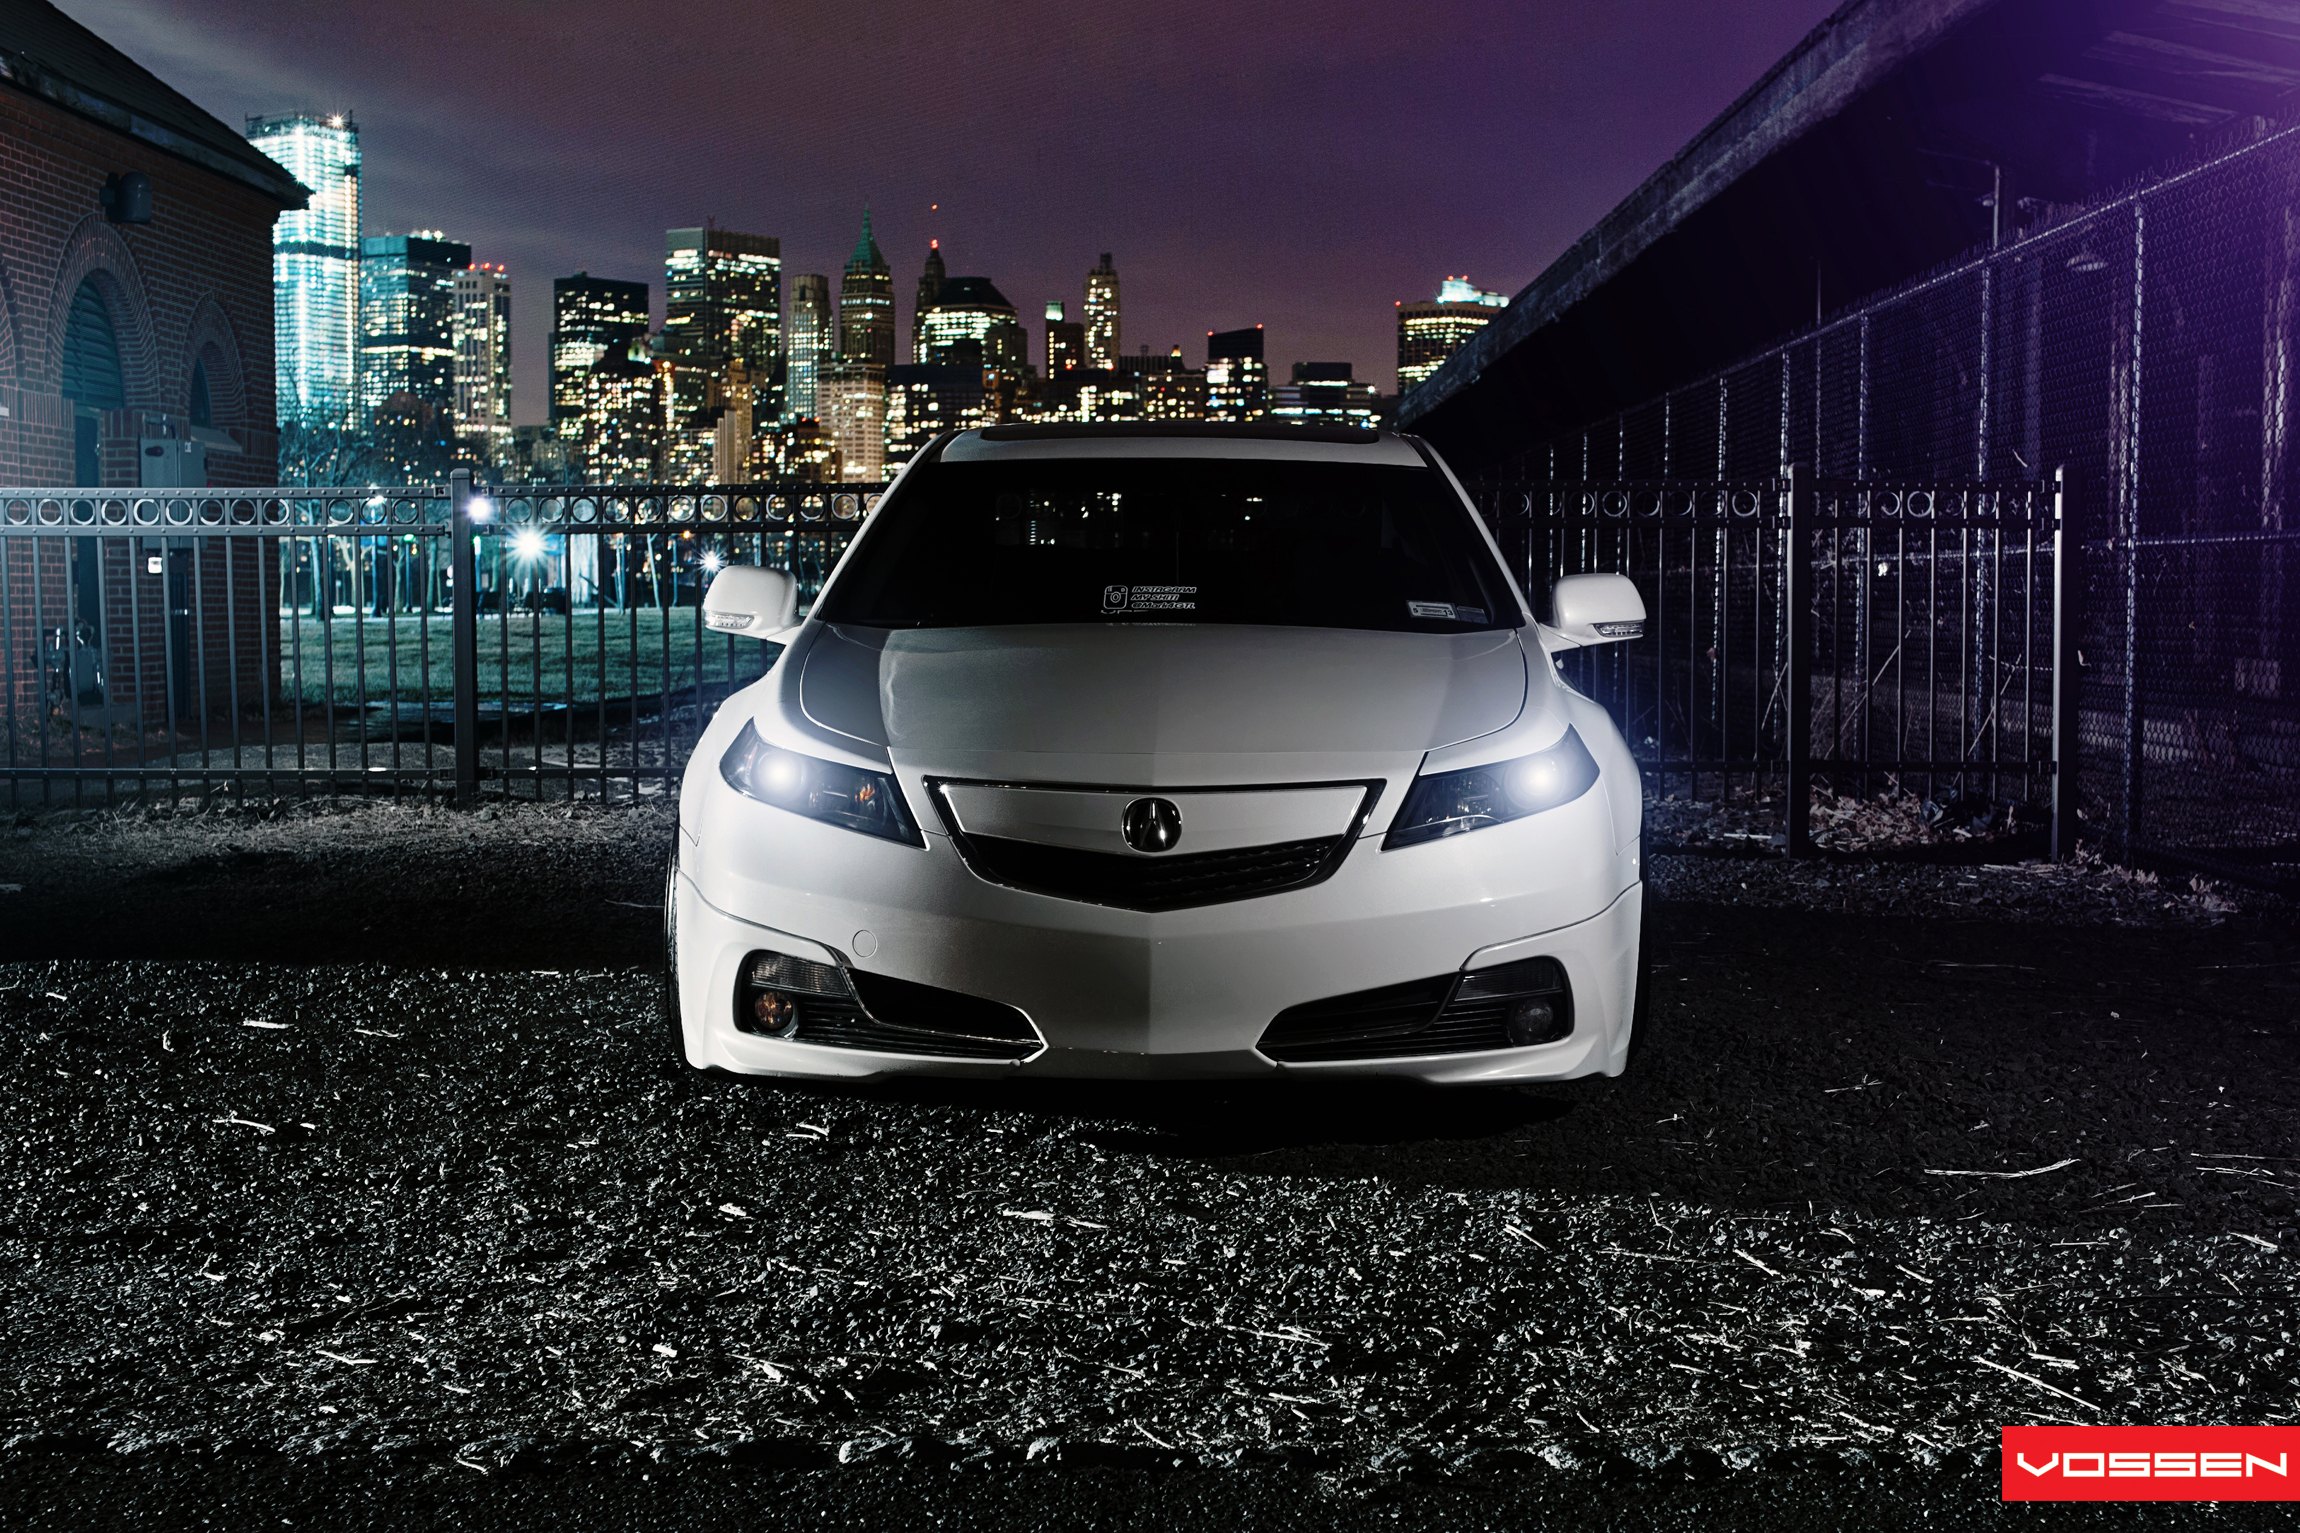 Custom Front Bumper on White Acura TL - Photo by Vossen